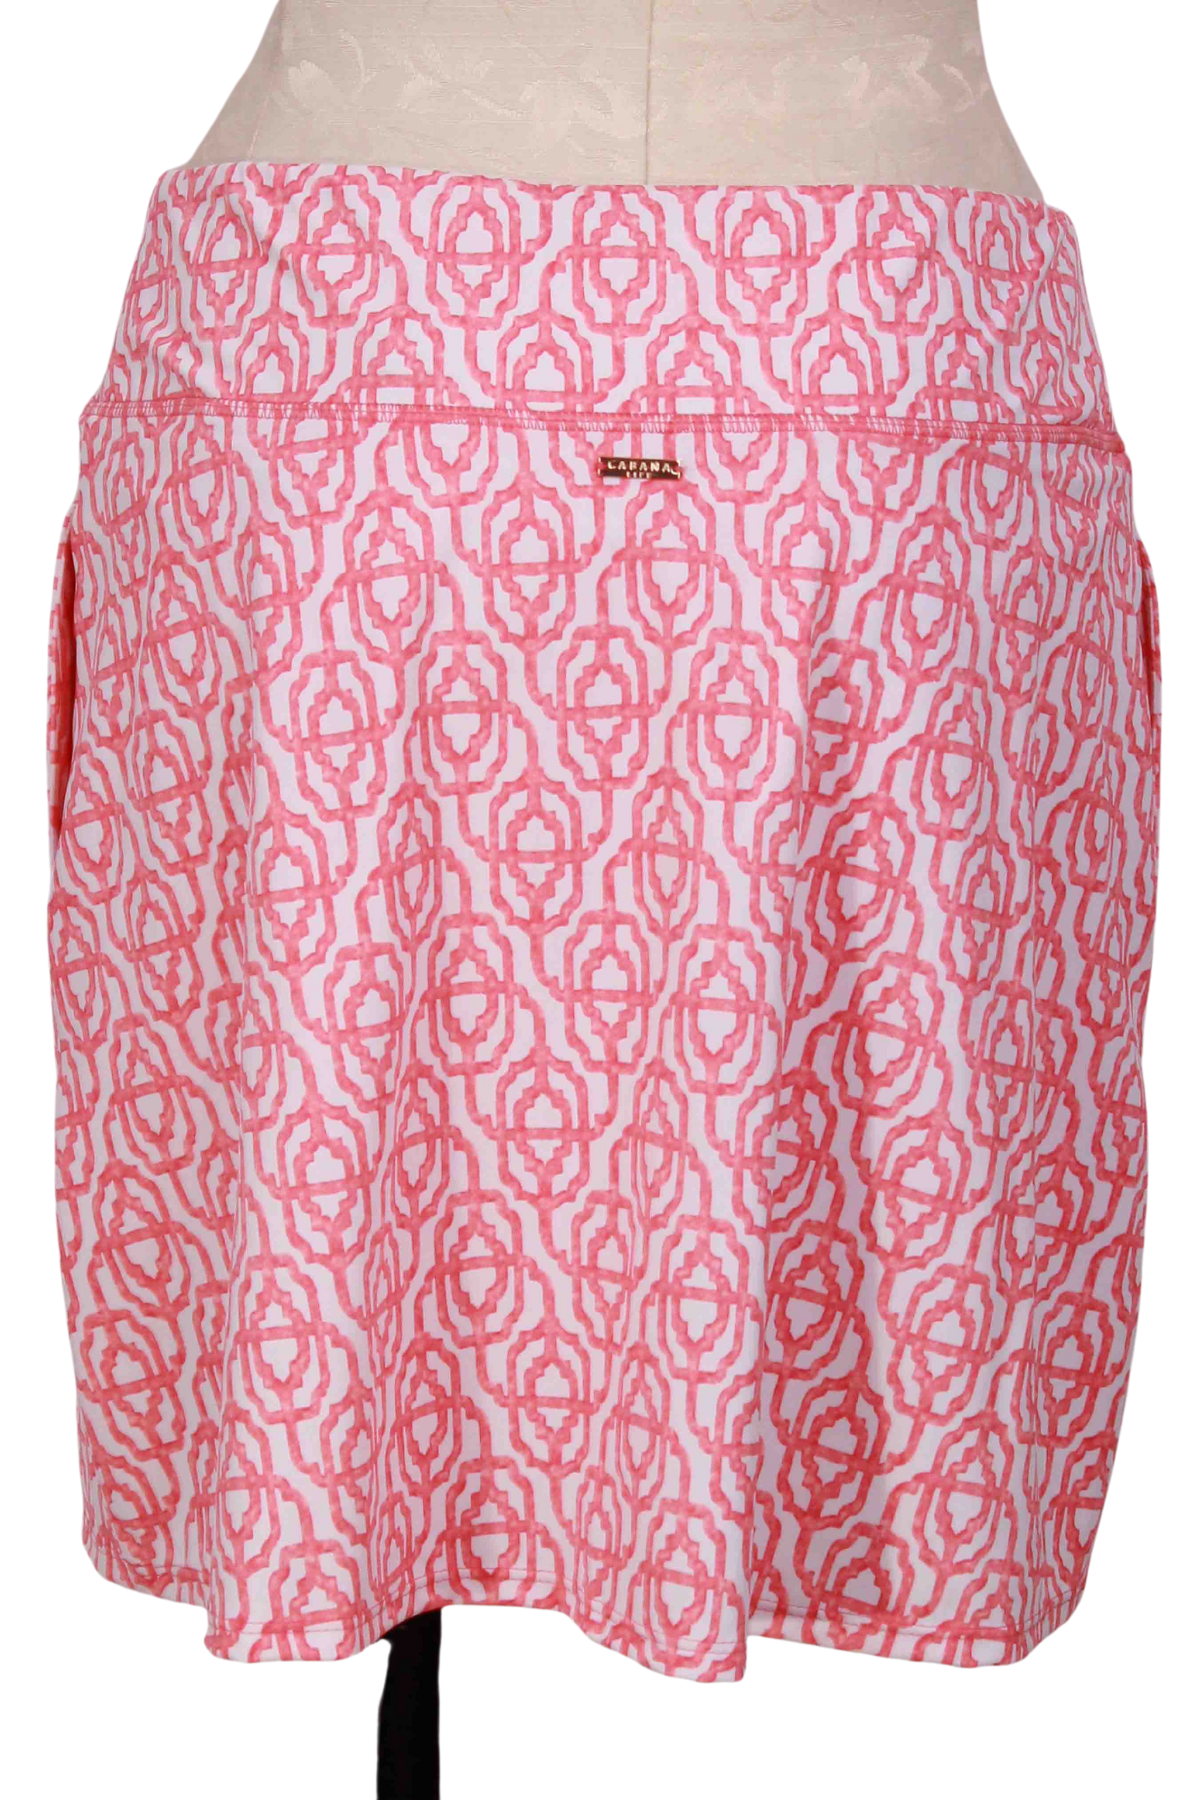 back view of Longer Skort with Napa Print by Cabana Life